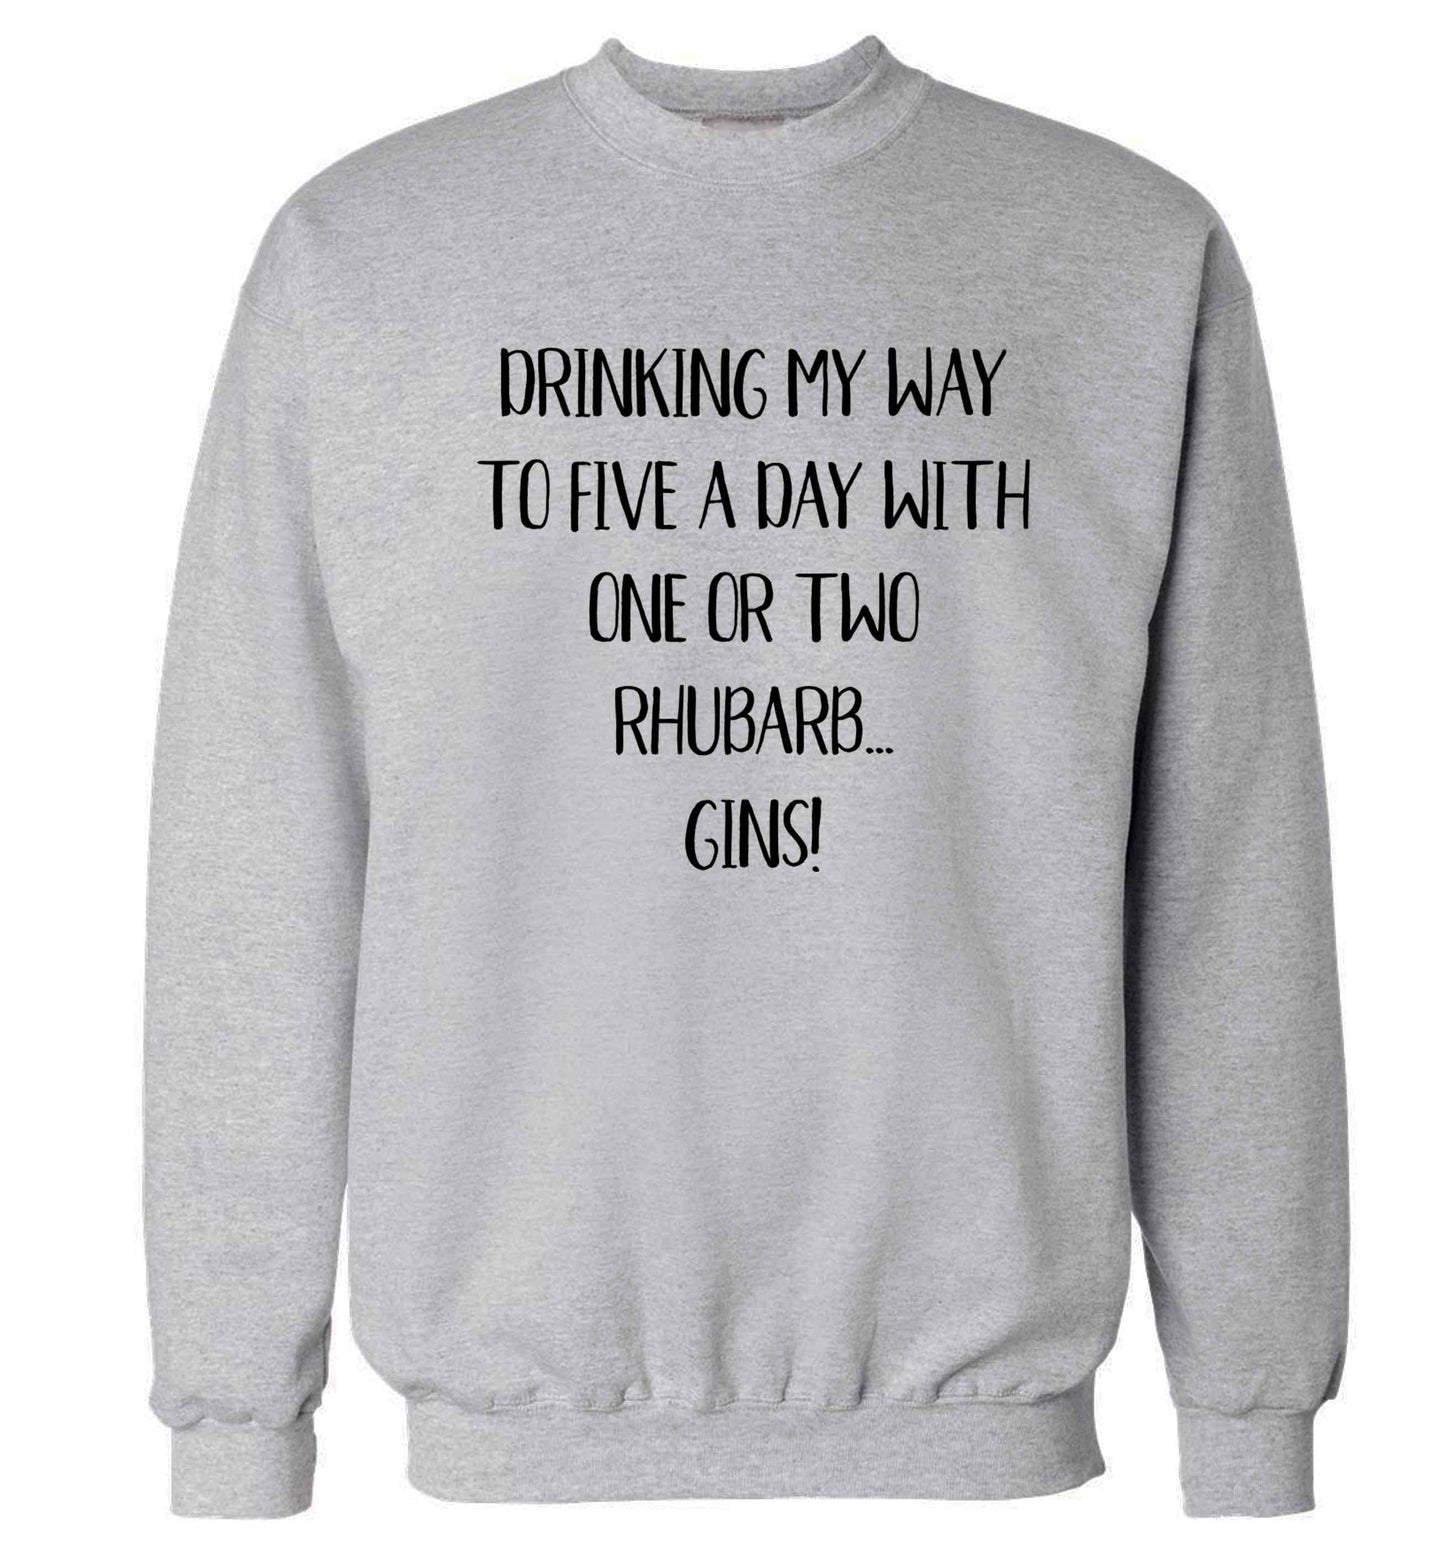 Drinking my way to five a day with one or two rhubarb gins Adult's unisex grey Sweater 2XL